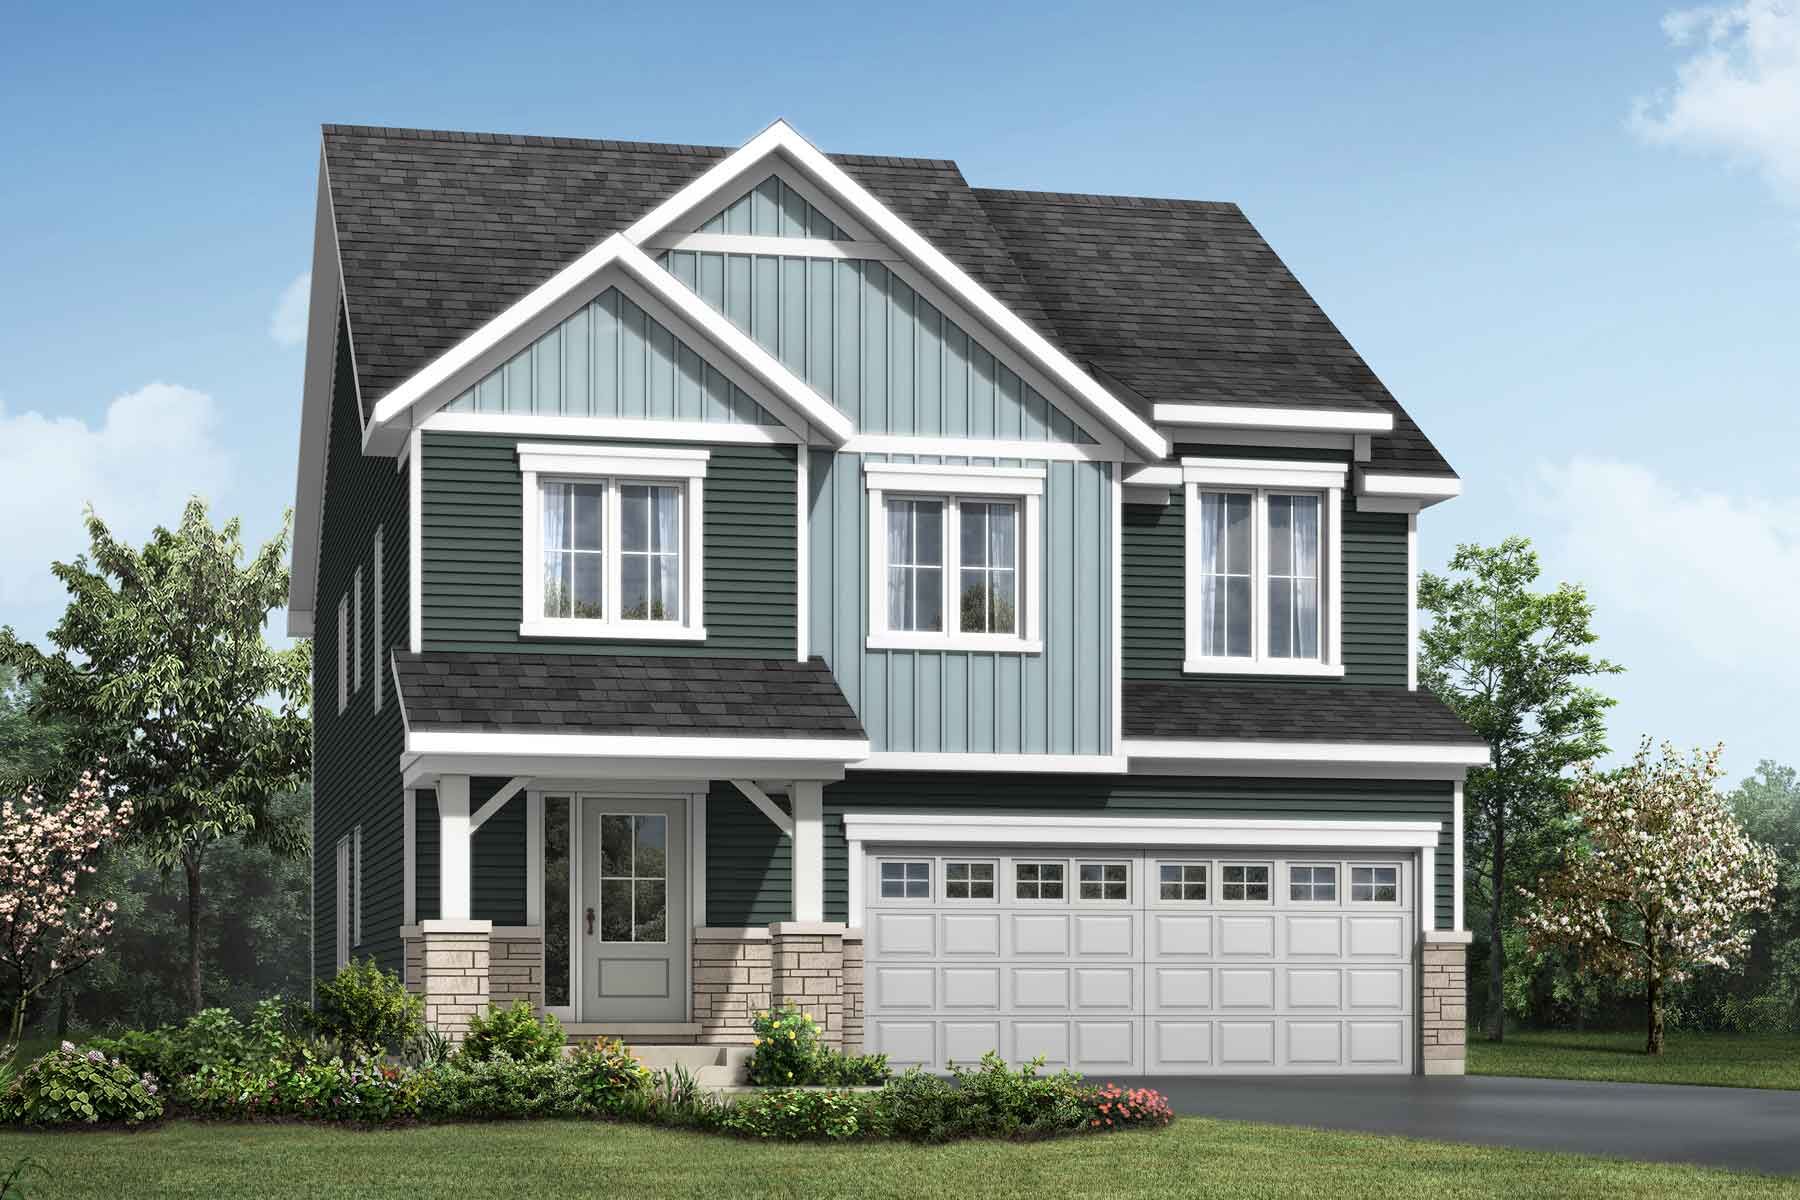 A Modern Farmhouse style detached home with a double car garage.